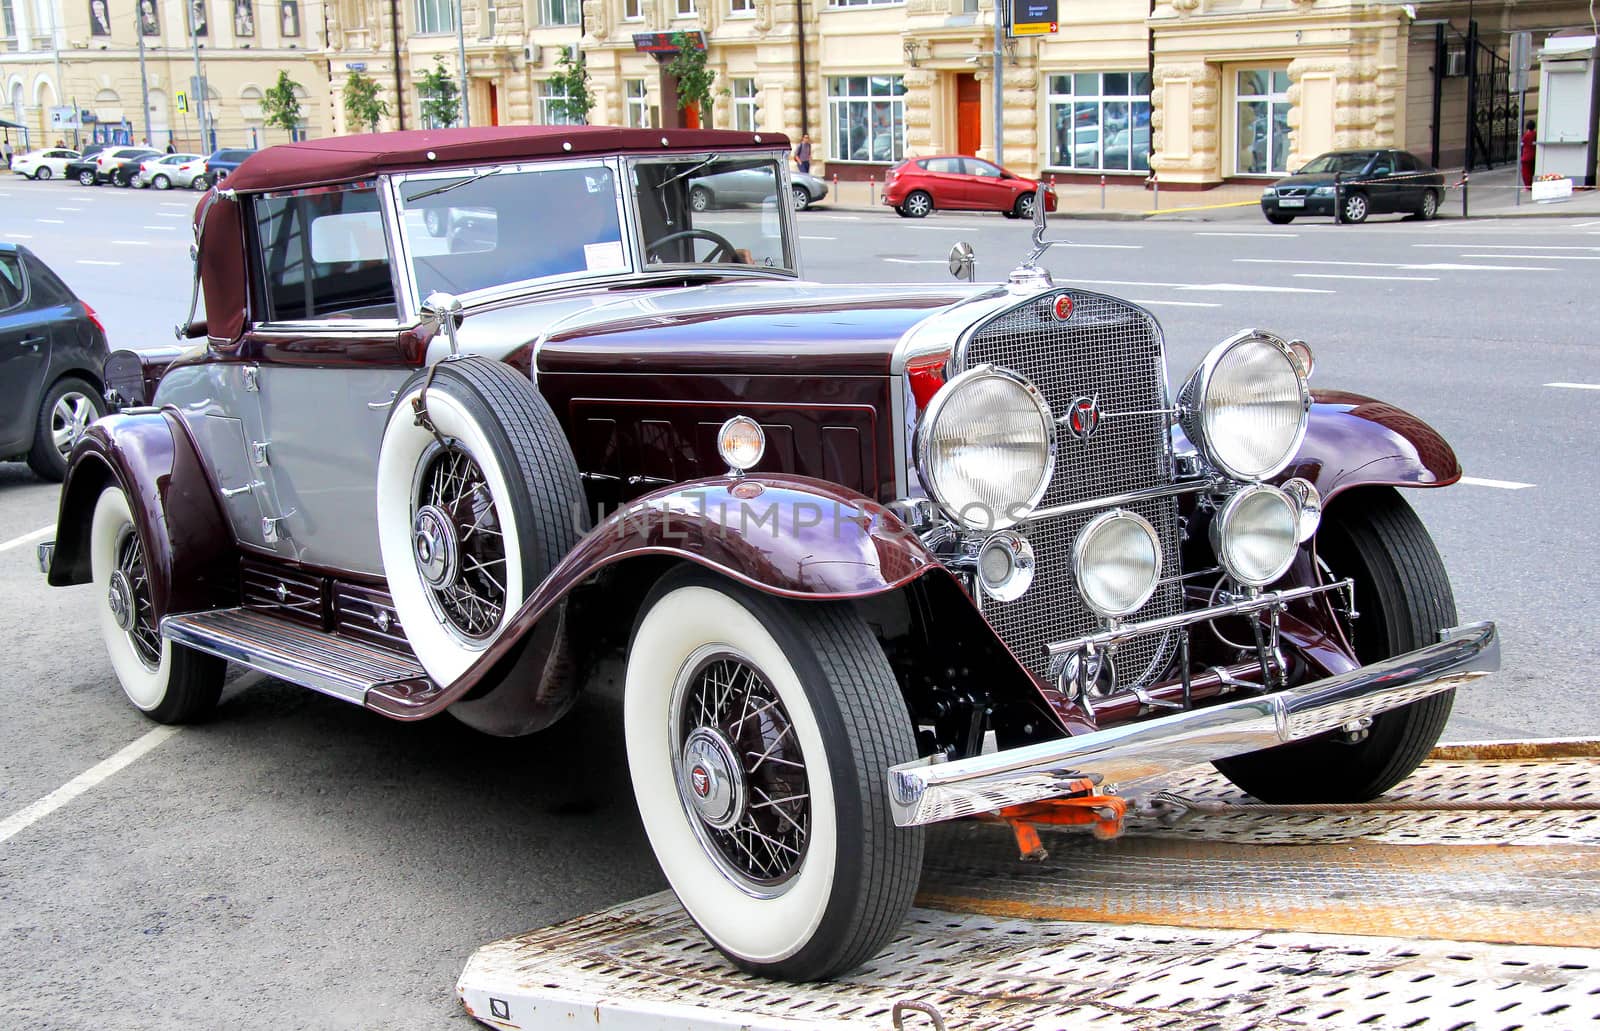 MOSCOW, RUSSIA - JUNE 2: American motor car Cadillac V-16 competes at the annual L.U.C. Chopard Classic Weekend Rally on June 2, 2013 in Moscow, Russia.